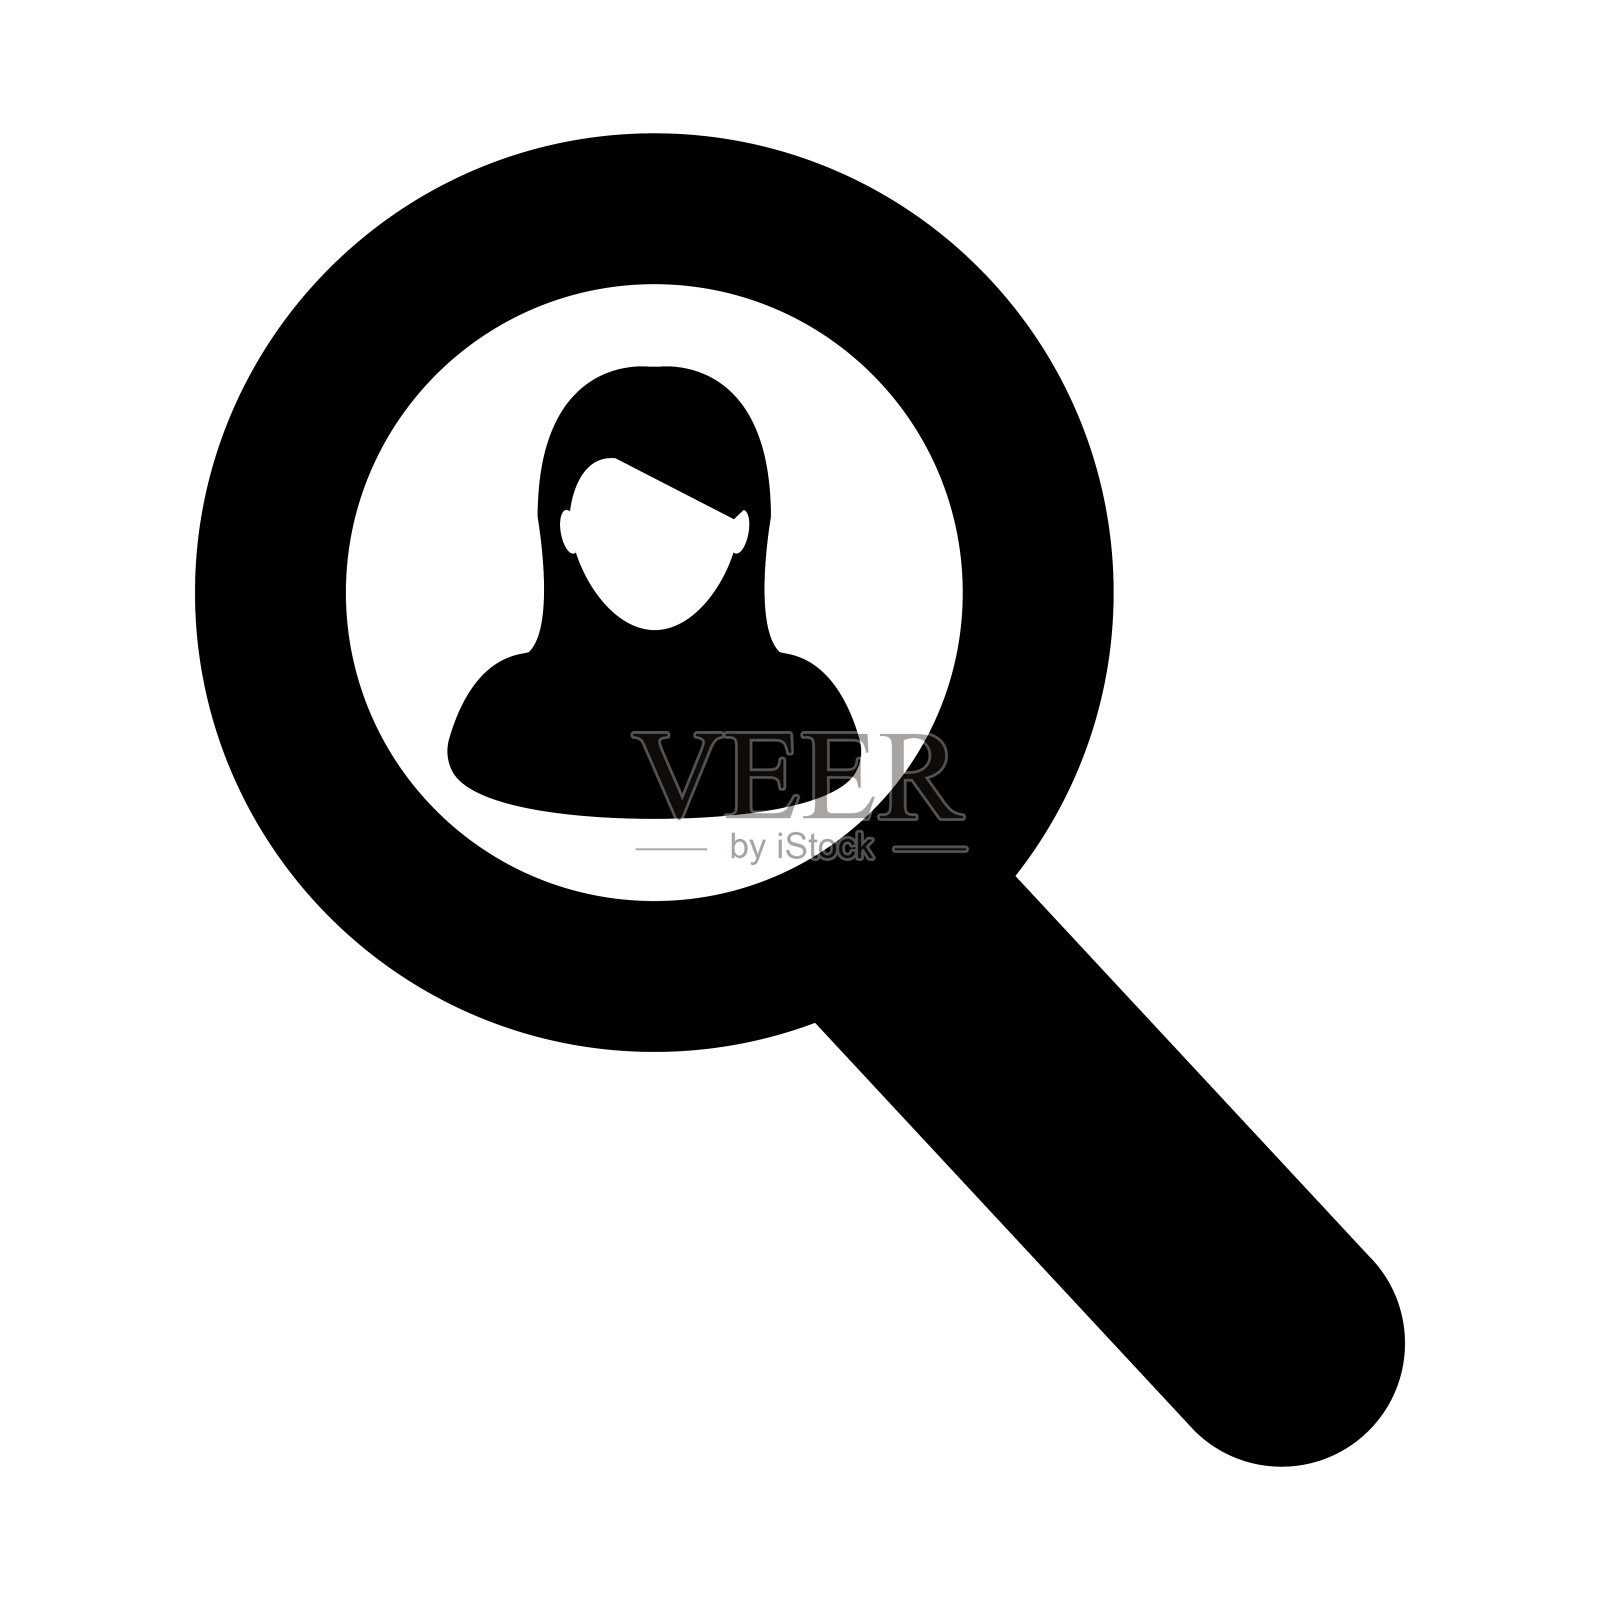 Search Icon - Person Vector Symbol for Female User Profile Avatar With Magnifying Glass for find in字形象形图插图设计元素图片